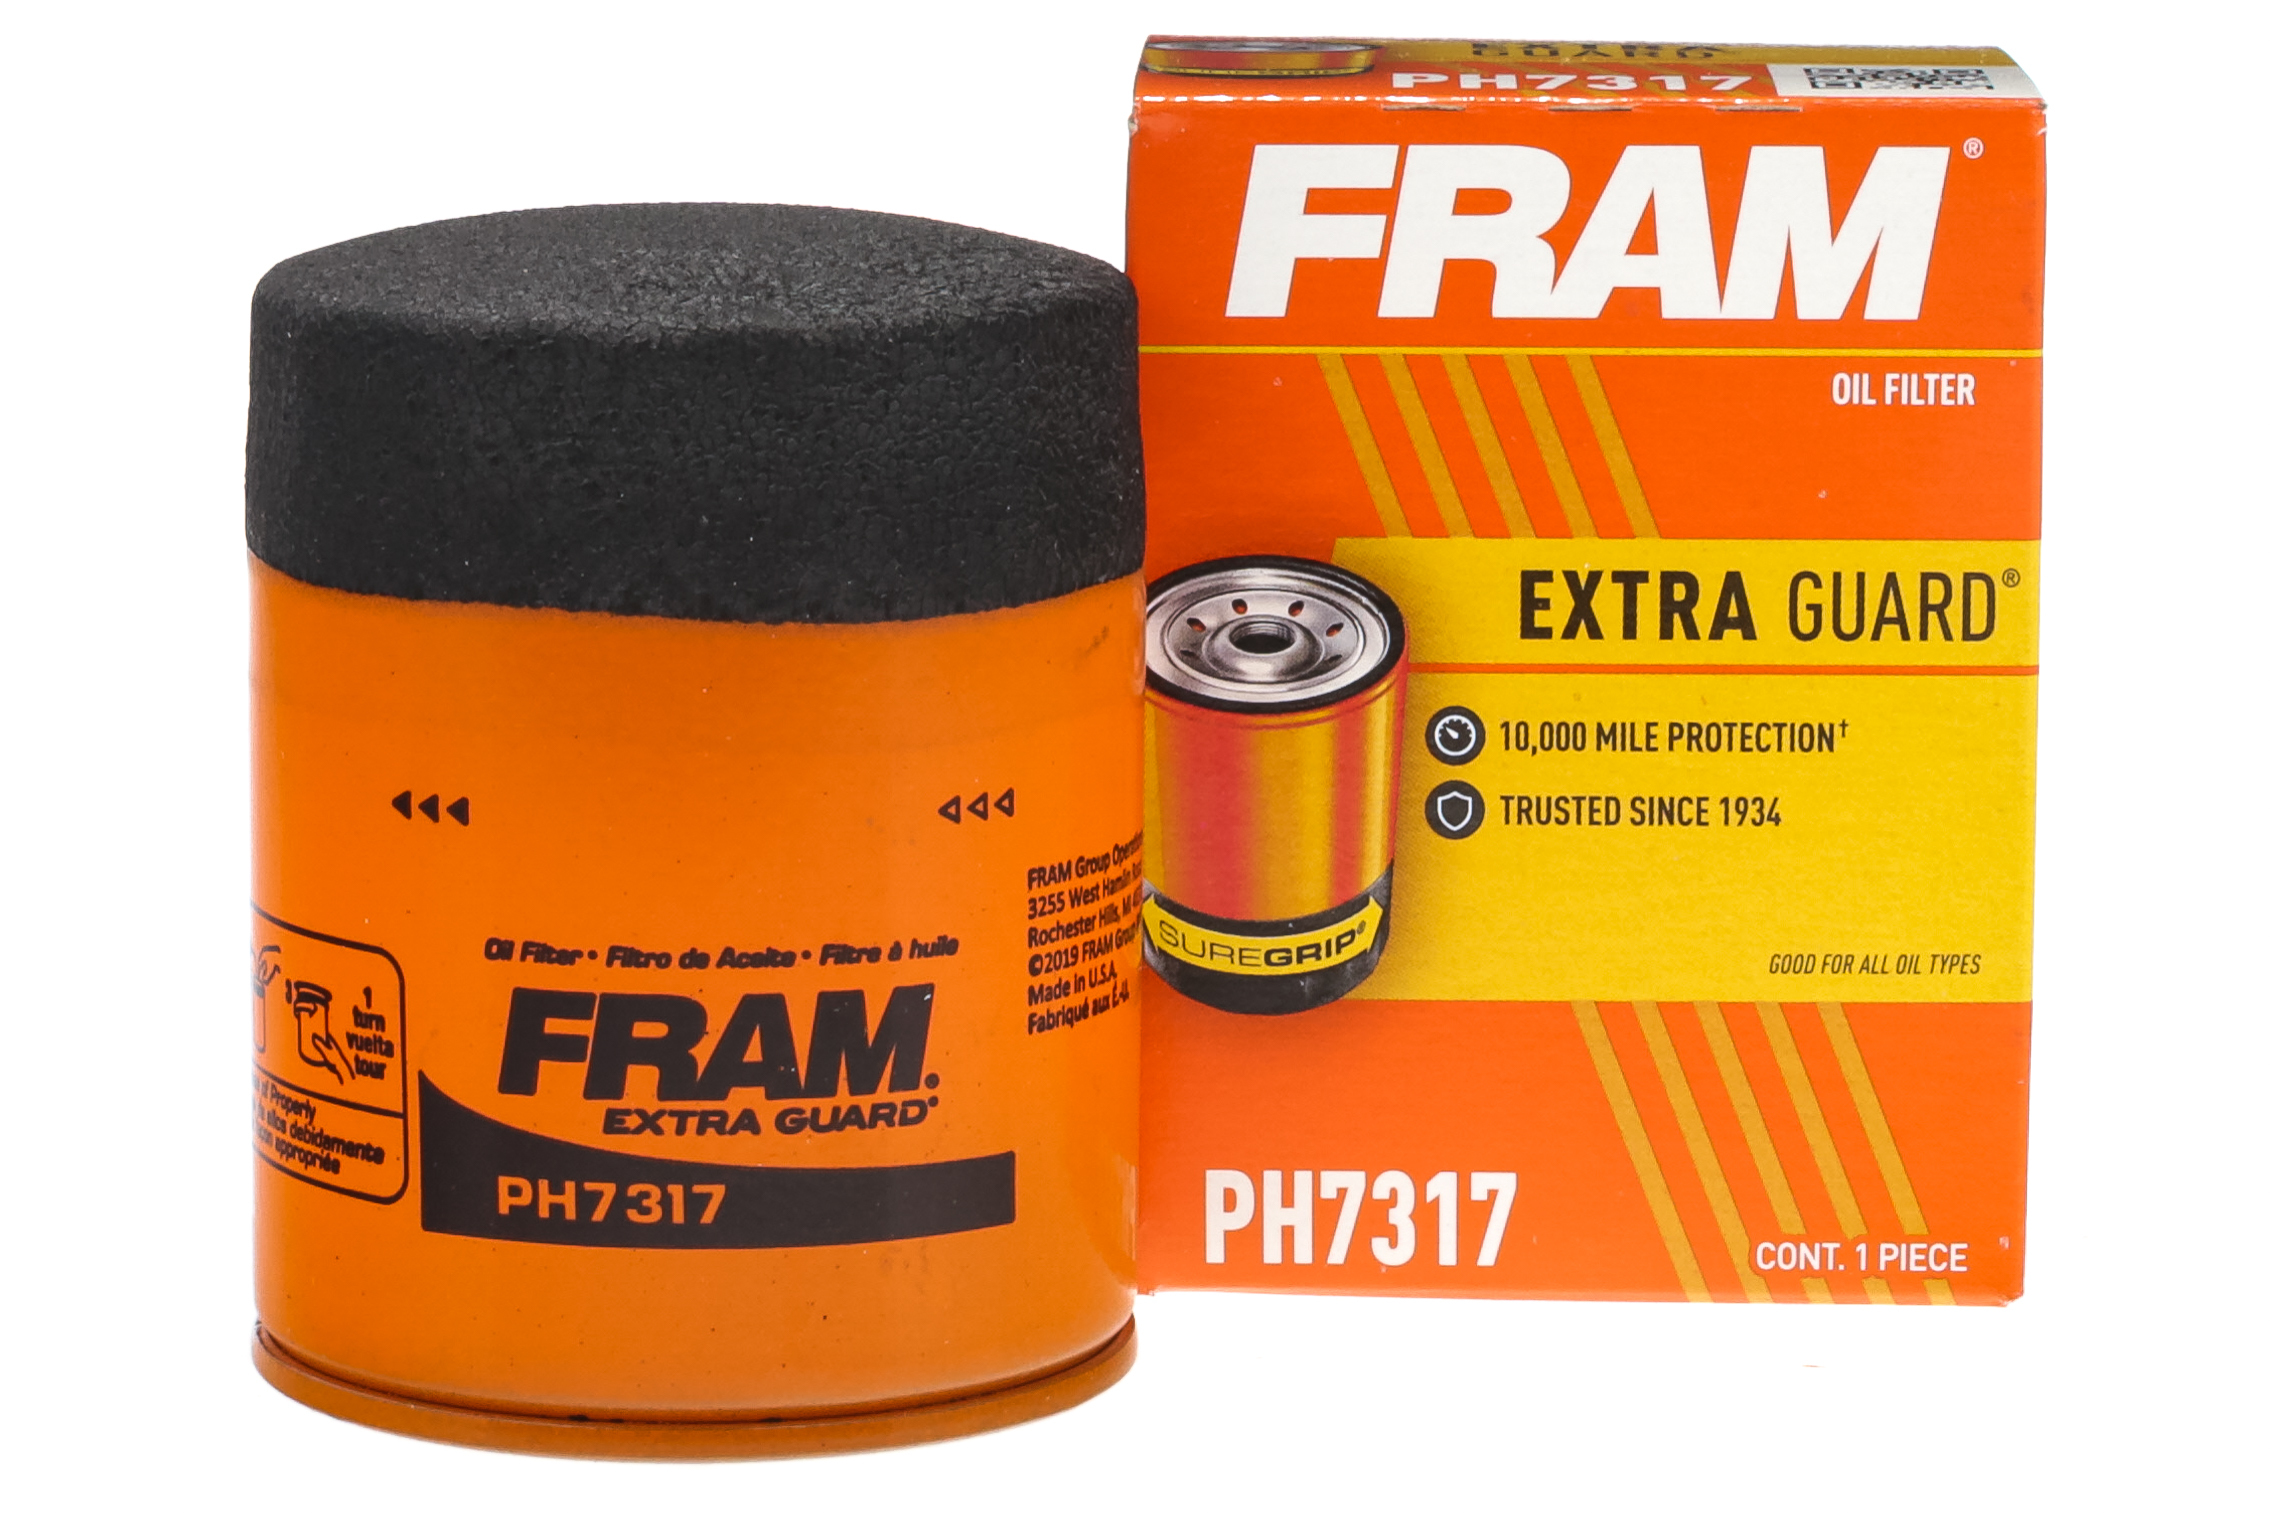 FRAM Extra Guard Oil Filter, PH7317, 10K mile Replacement Oil Filter - image 1 of 10